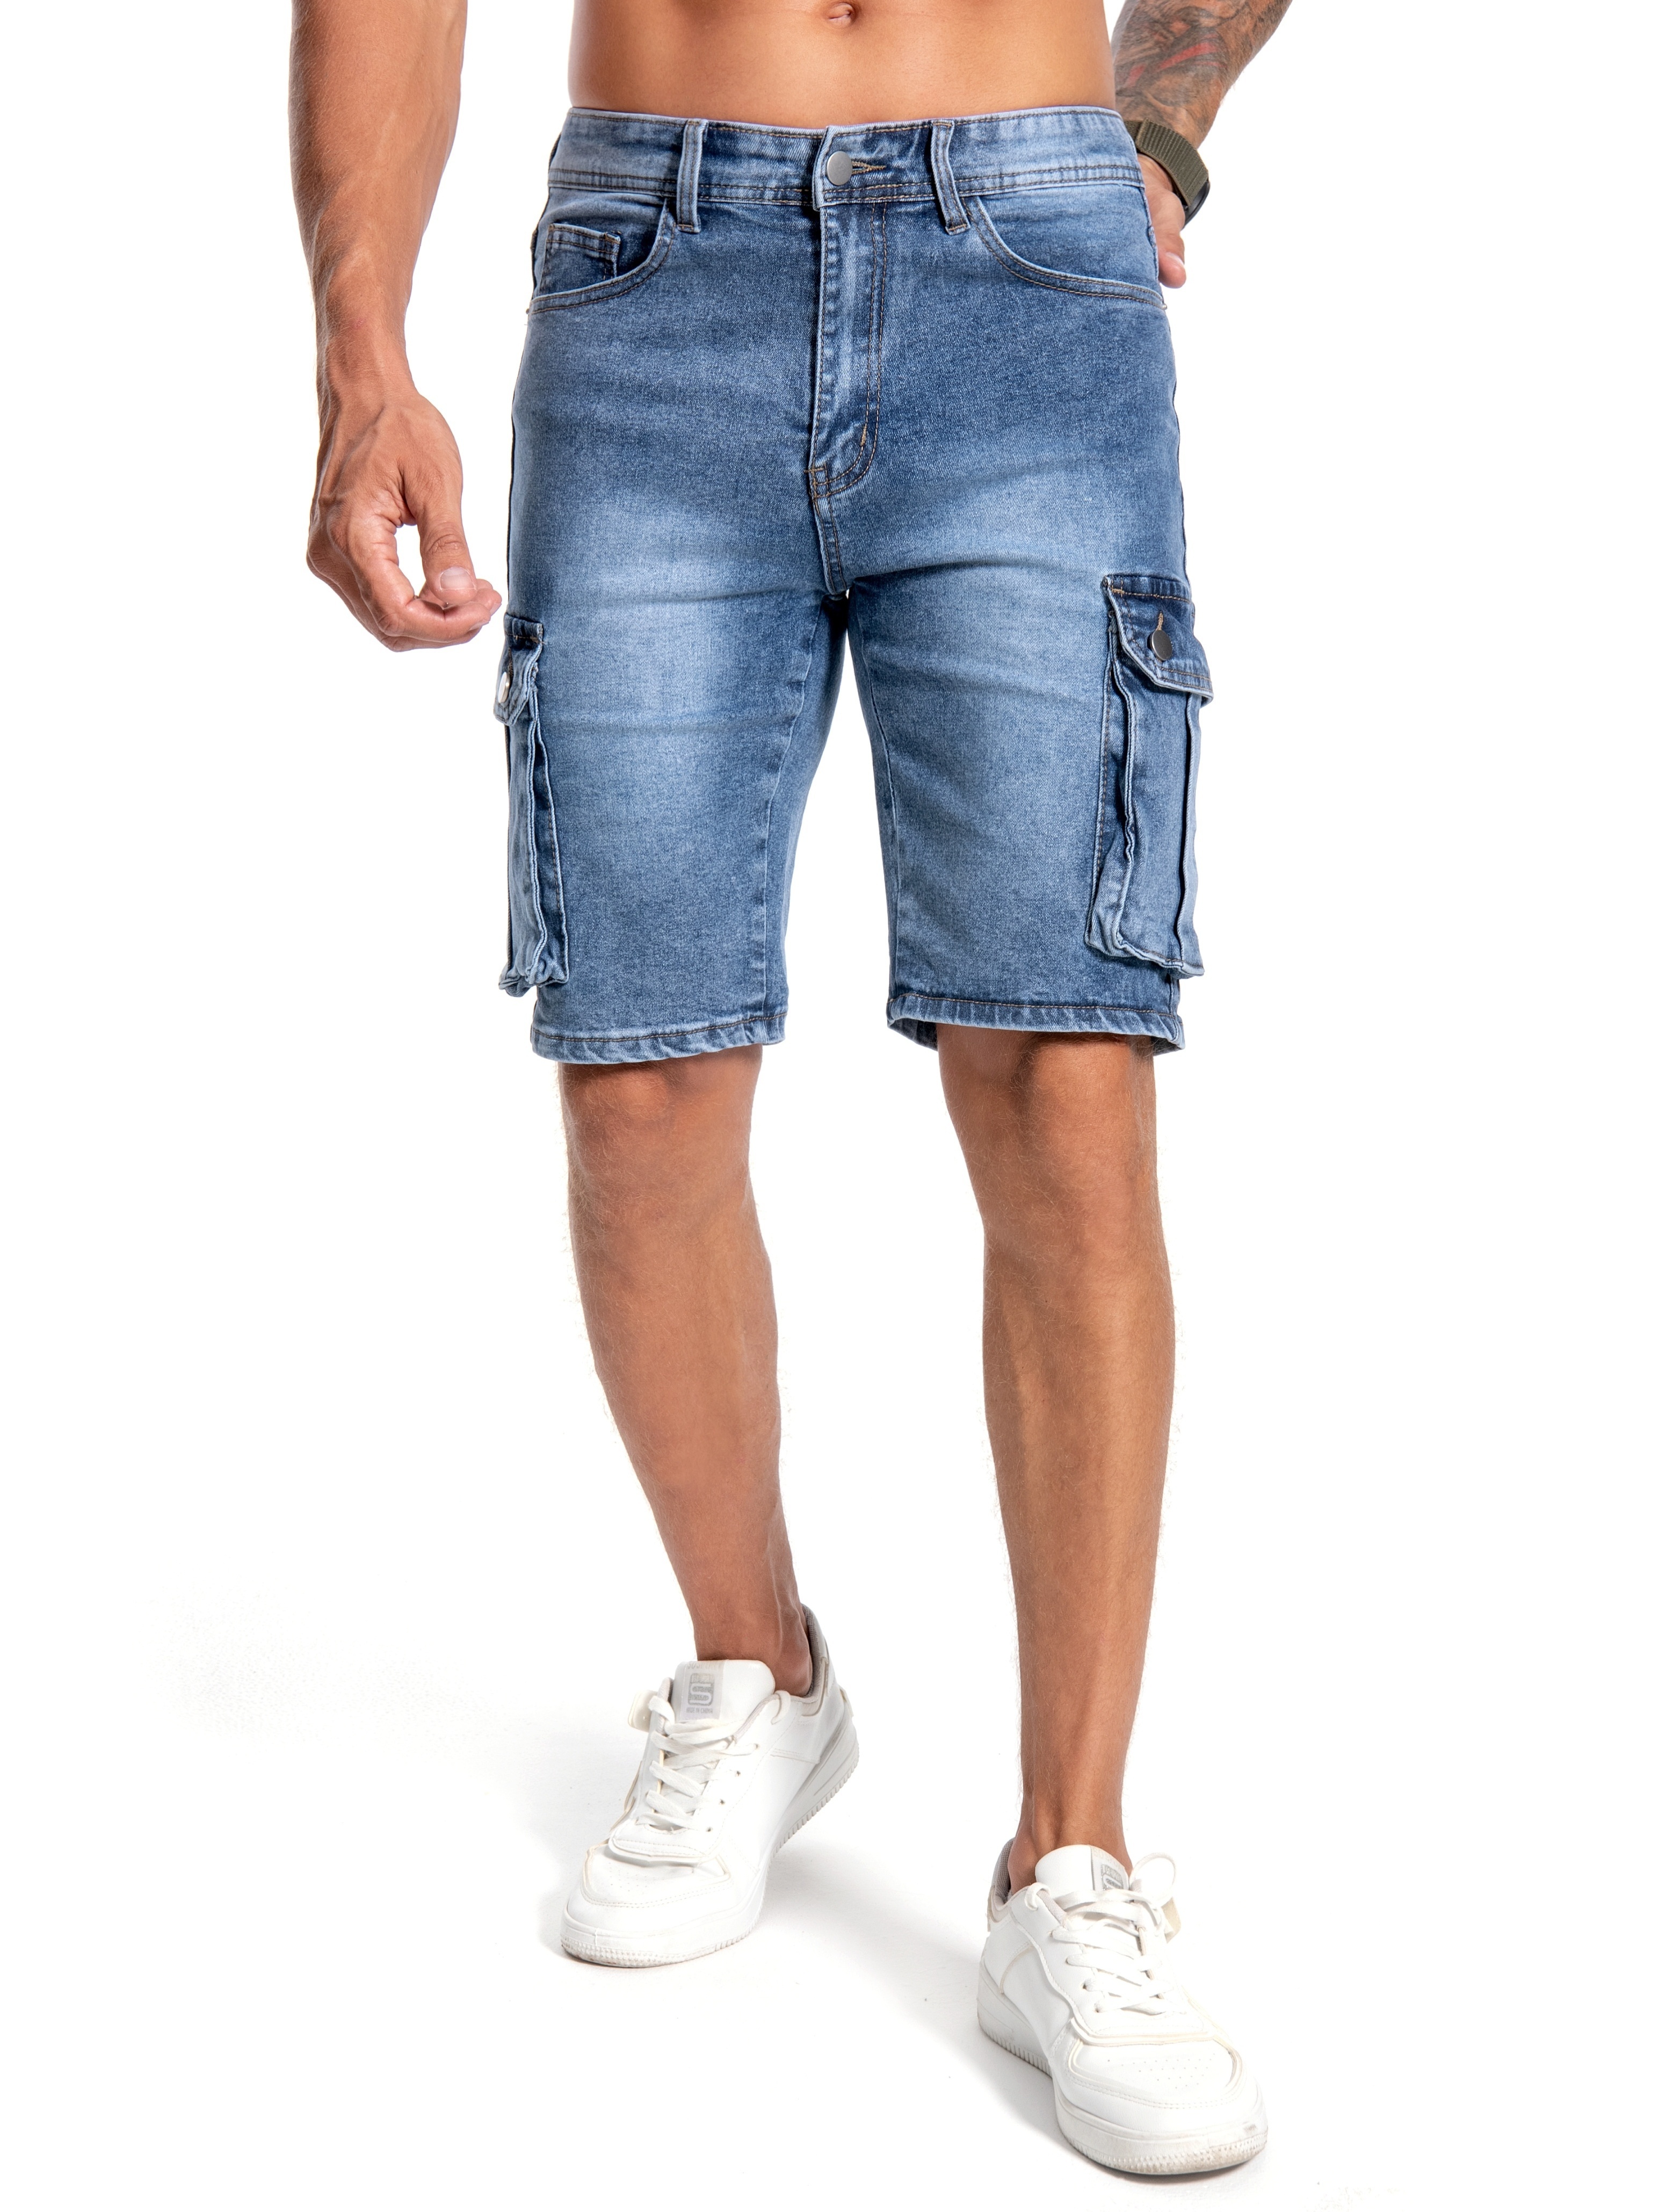 5 Denim Shorts Outfit Ideas For Men To Look Cool  Mens shorts outfits,  Mens summer outfits, Jean short outfits